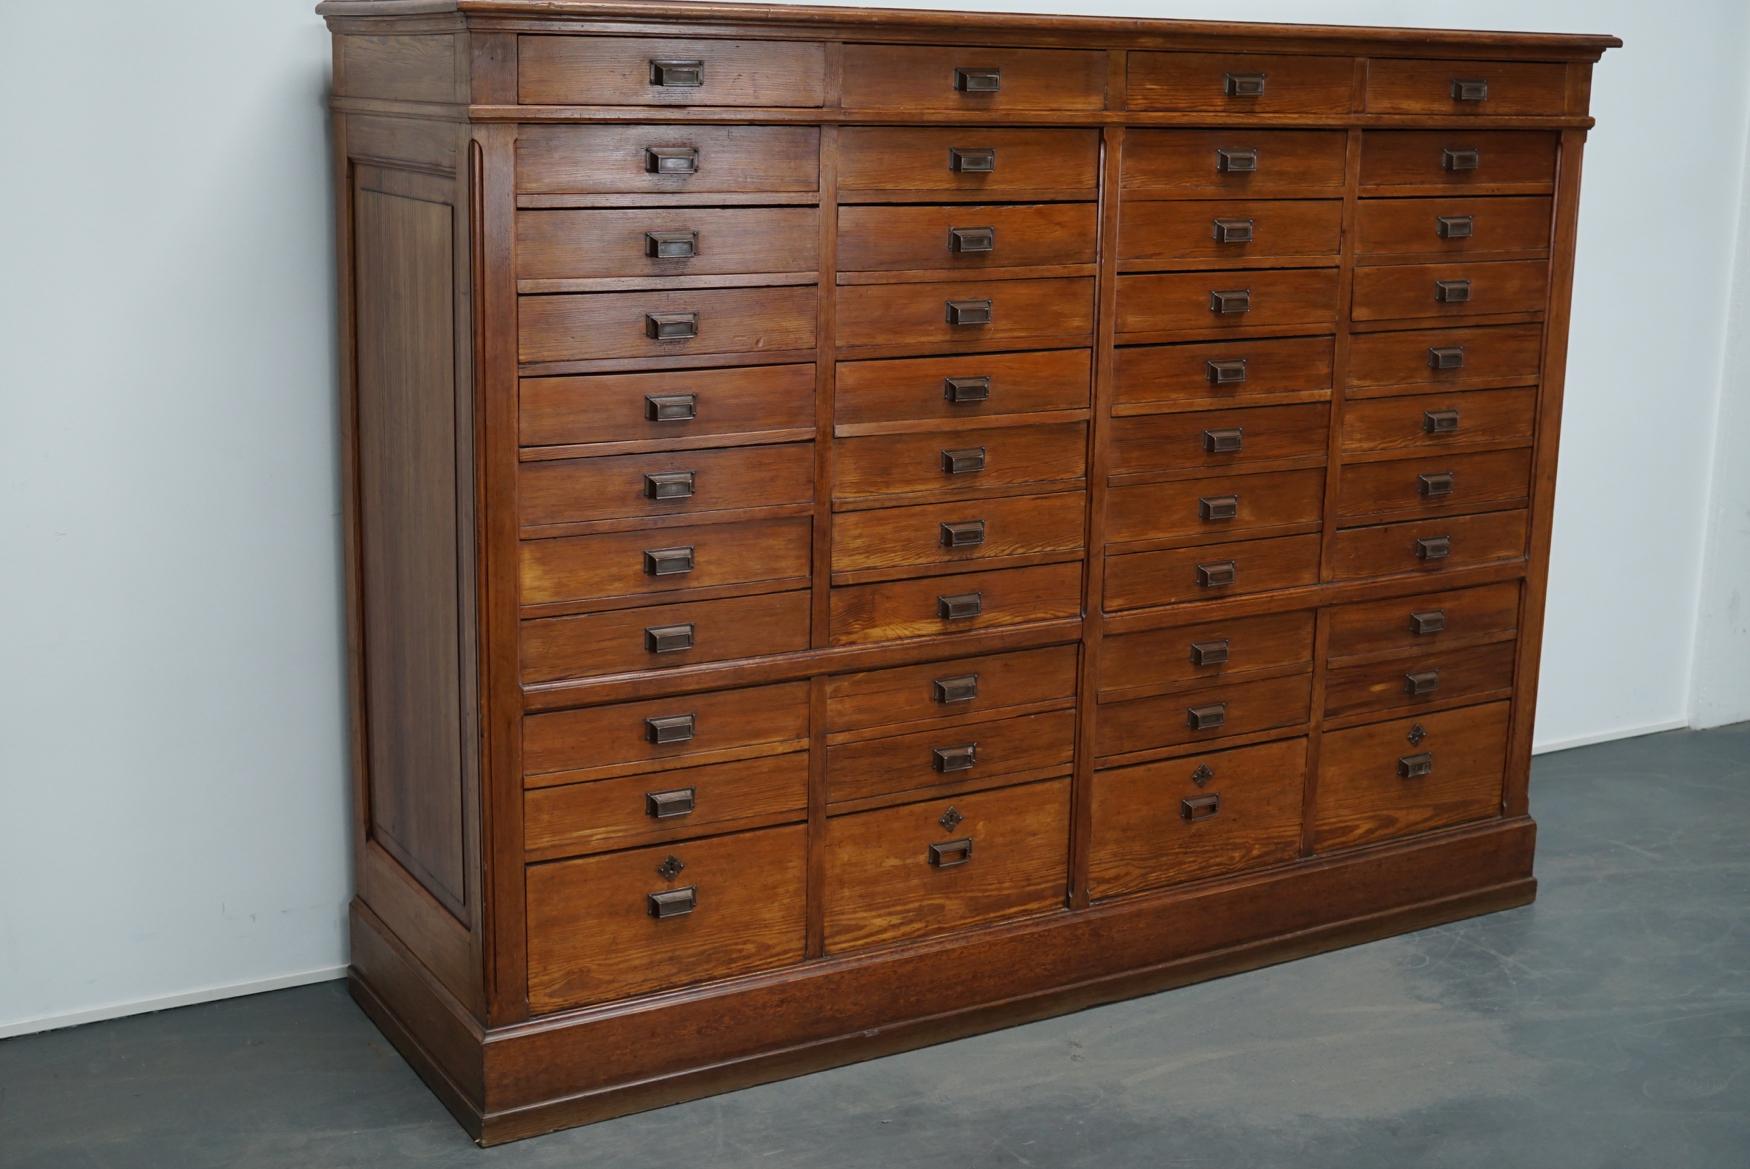 This apothecary cabinet of drawers was designed, circa 1920s in the Netherlands. The piece is made from pitch pine and features 44 drawers with brass hardware. The interior dimensions of the drawers are: D 48 x W 42.5 x H 7.5 and 20.5 cm.
 